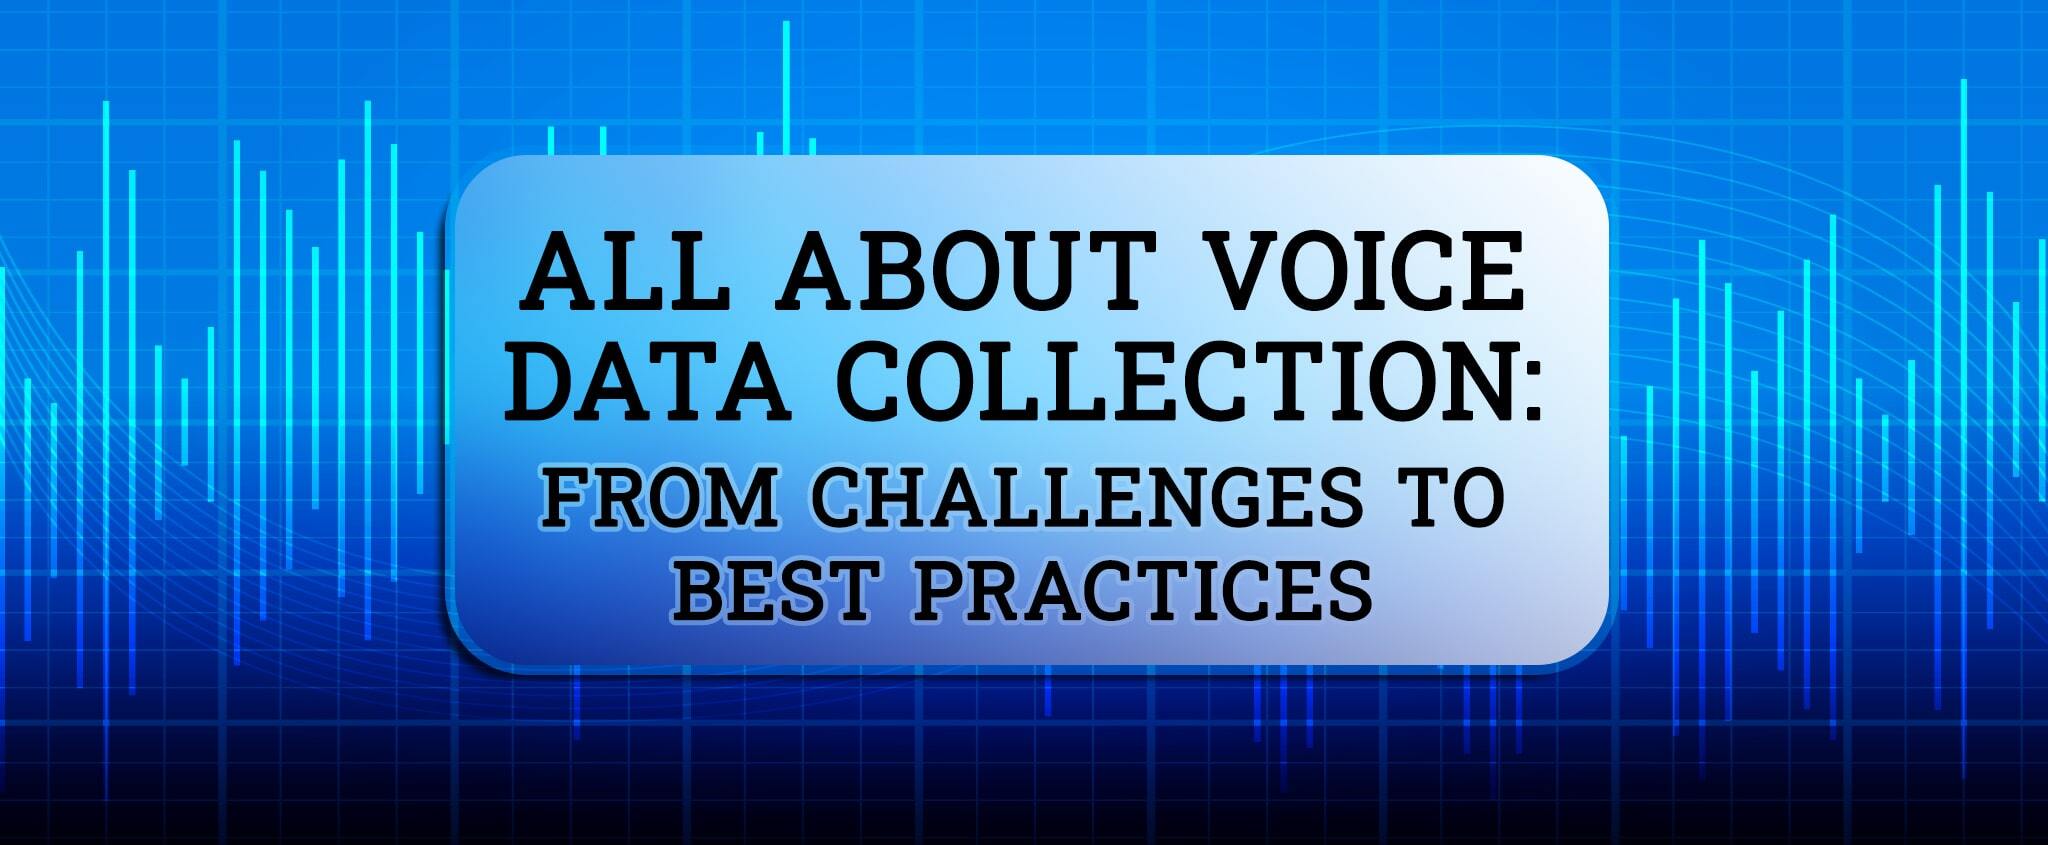 All About Voice Data Collection: From Challenges to Best Practices